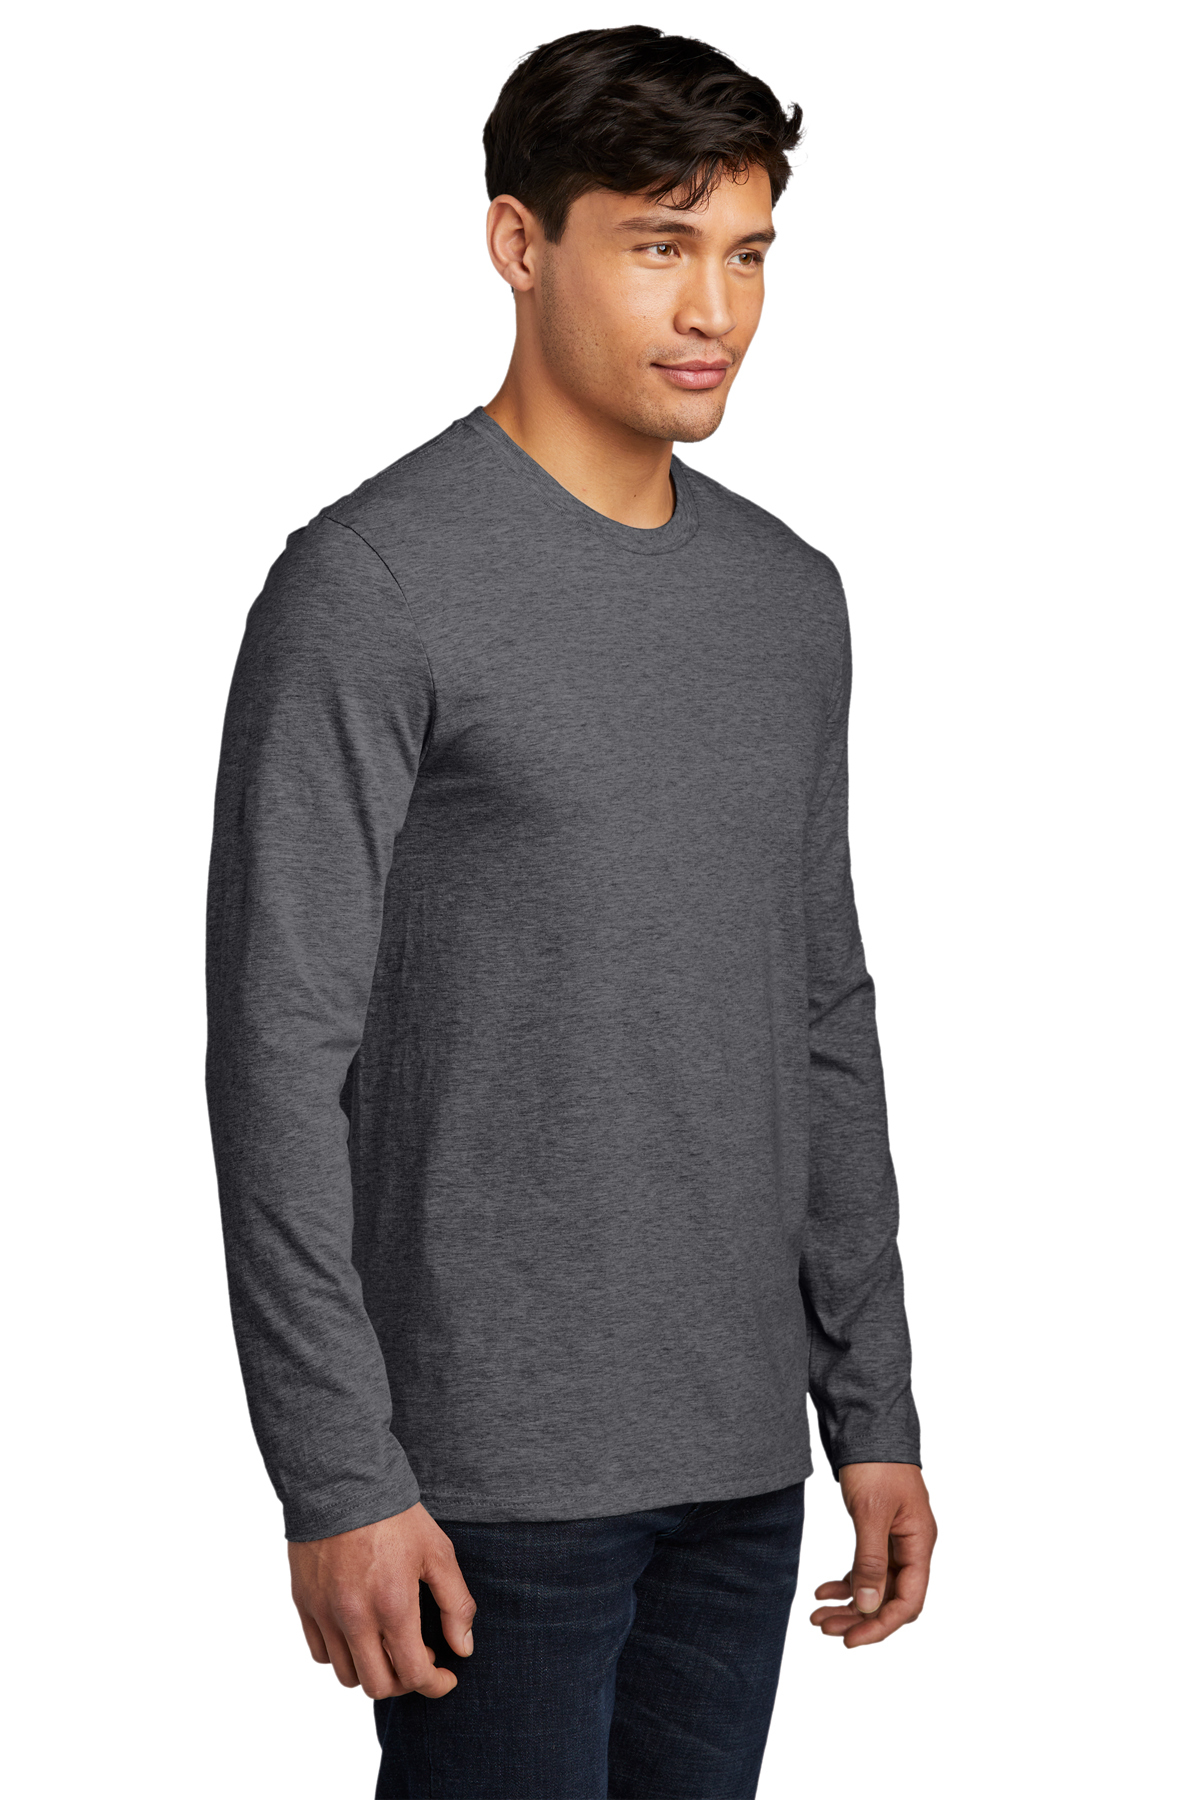 District Very Important Tee Long Sleeve | Product | District